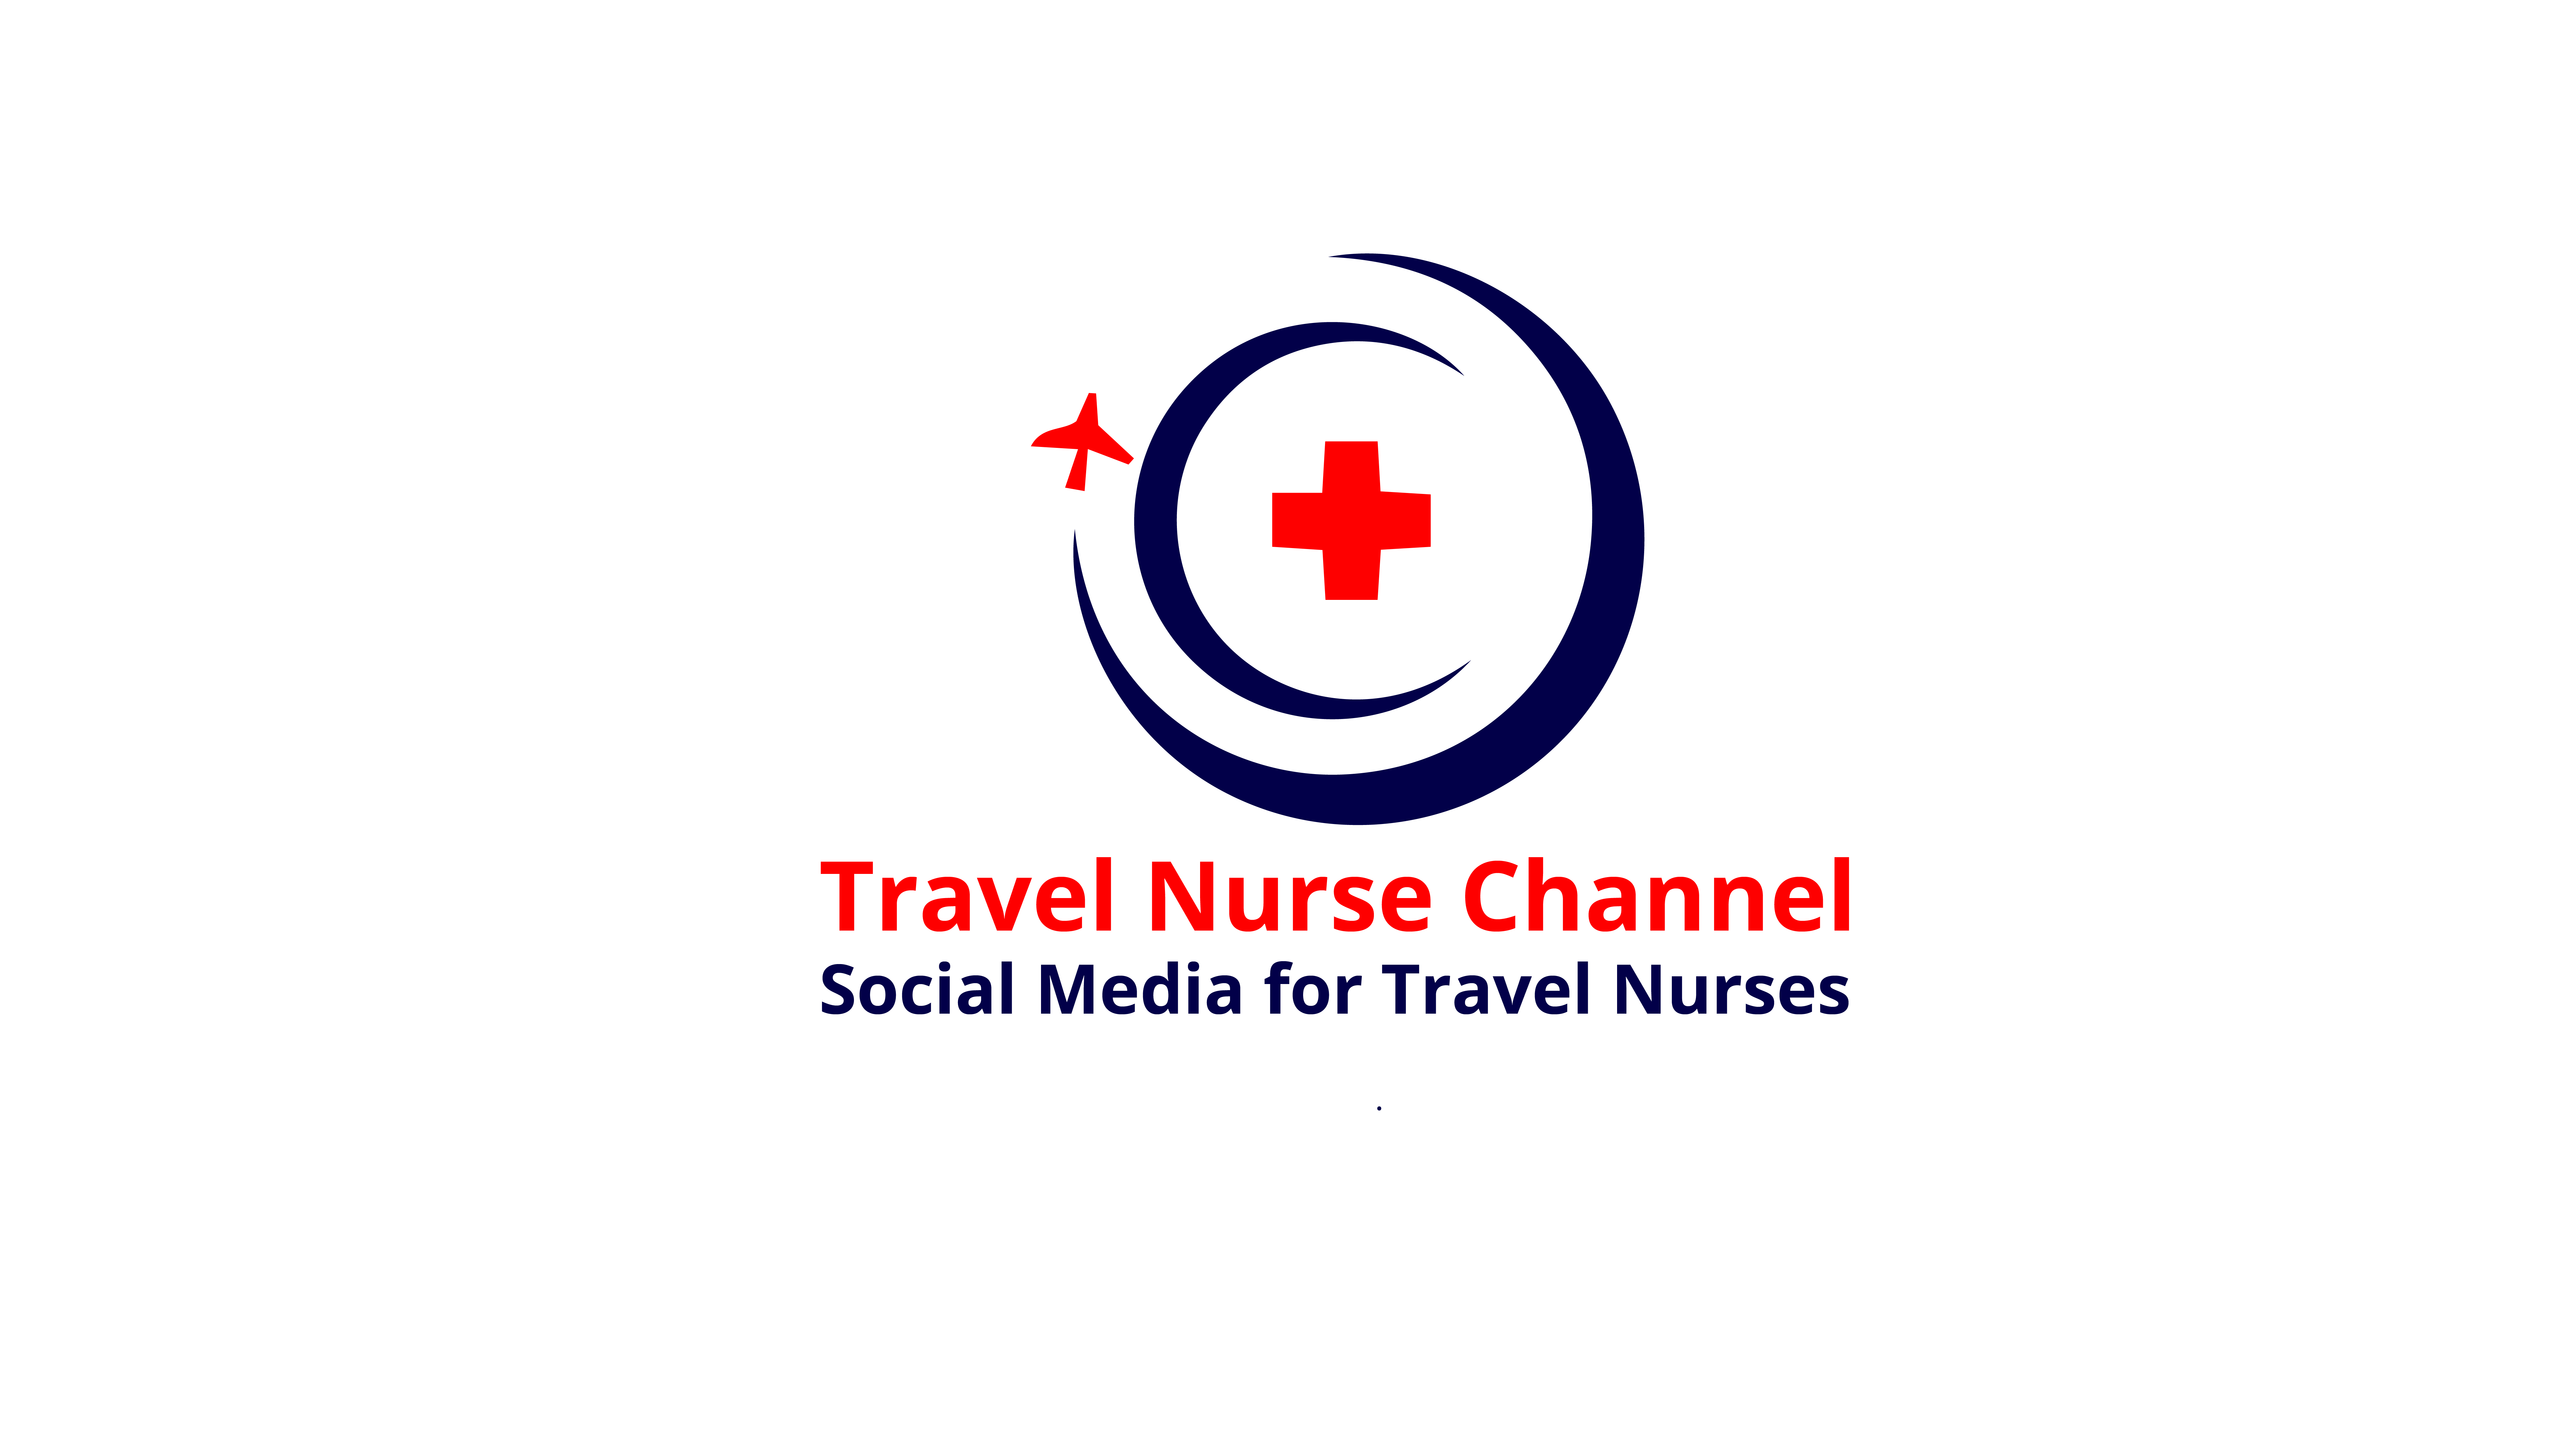 Travel Nurse Channel (Social Media for Travel Nurses) Invites All Nurses and Healthcare Workers To Join Them In Lively Discussions Twice Weekly